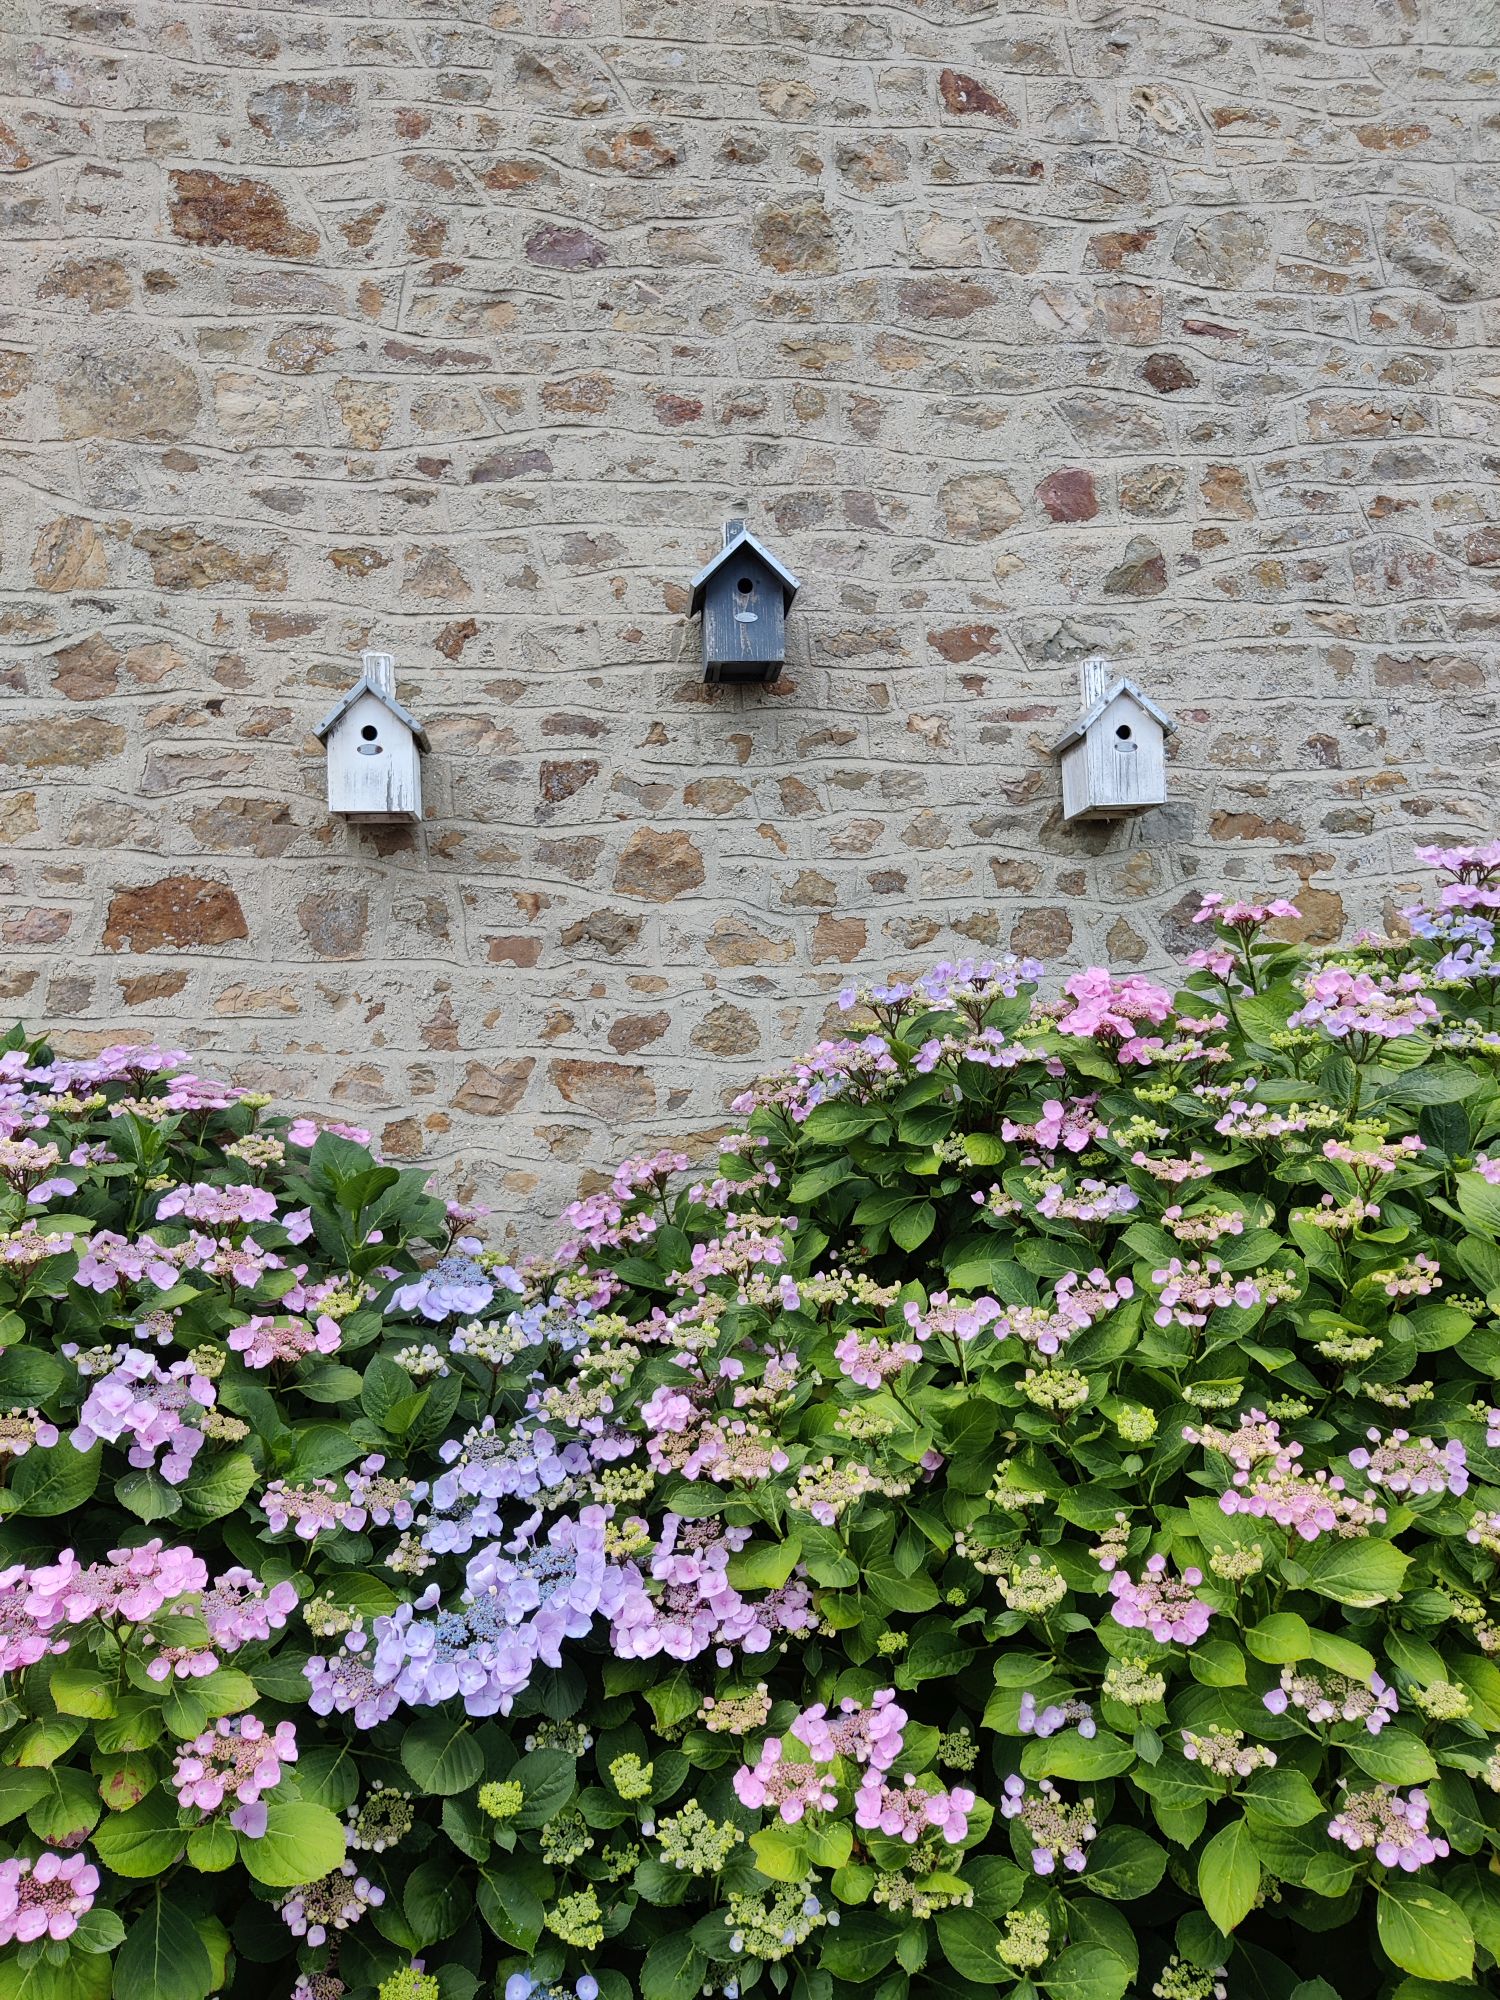 Picturesque birdhouses mounted on a wall above some lilac and pink flowers